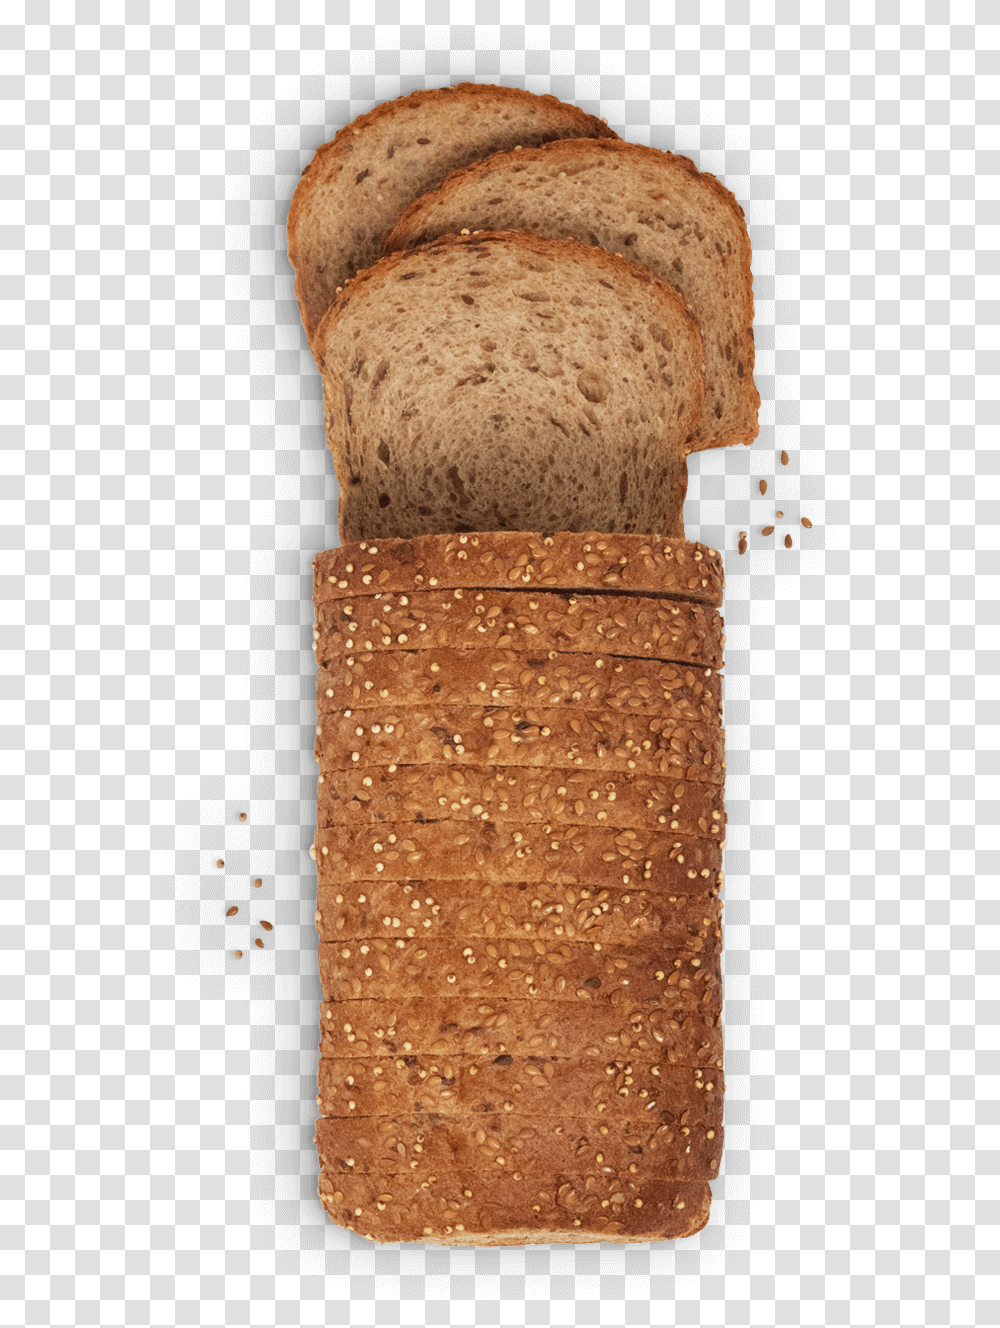 Download Grains Image With No Whole Wheat Bread, Food, Cork, Cracker, Archaeology Transparent Png